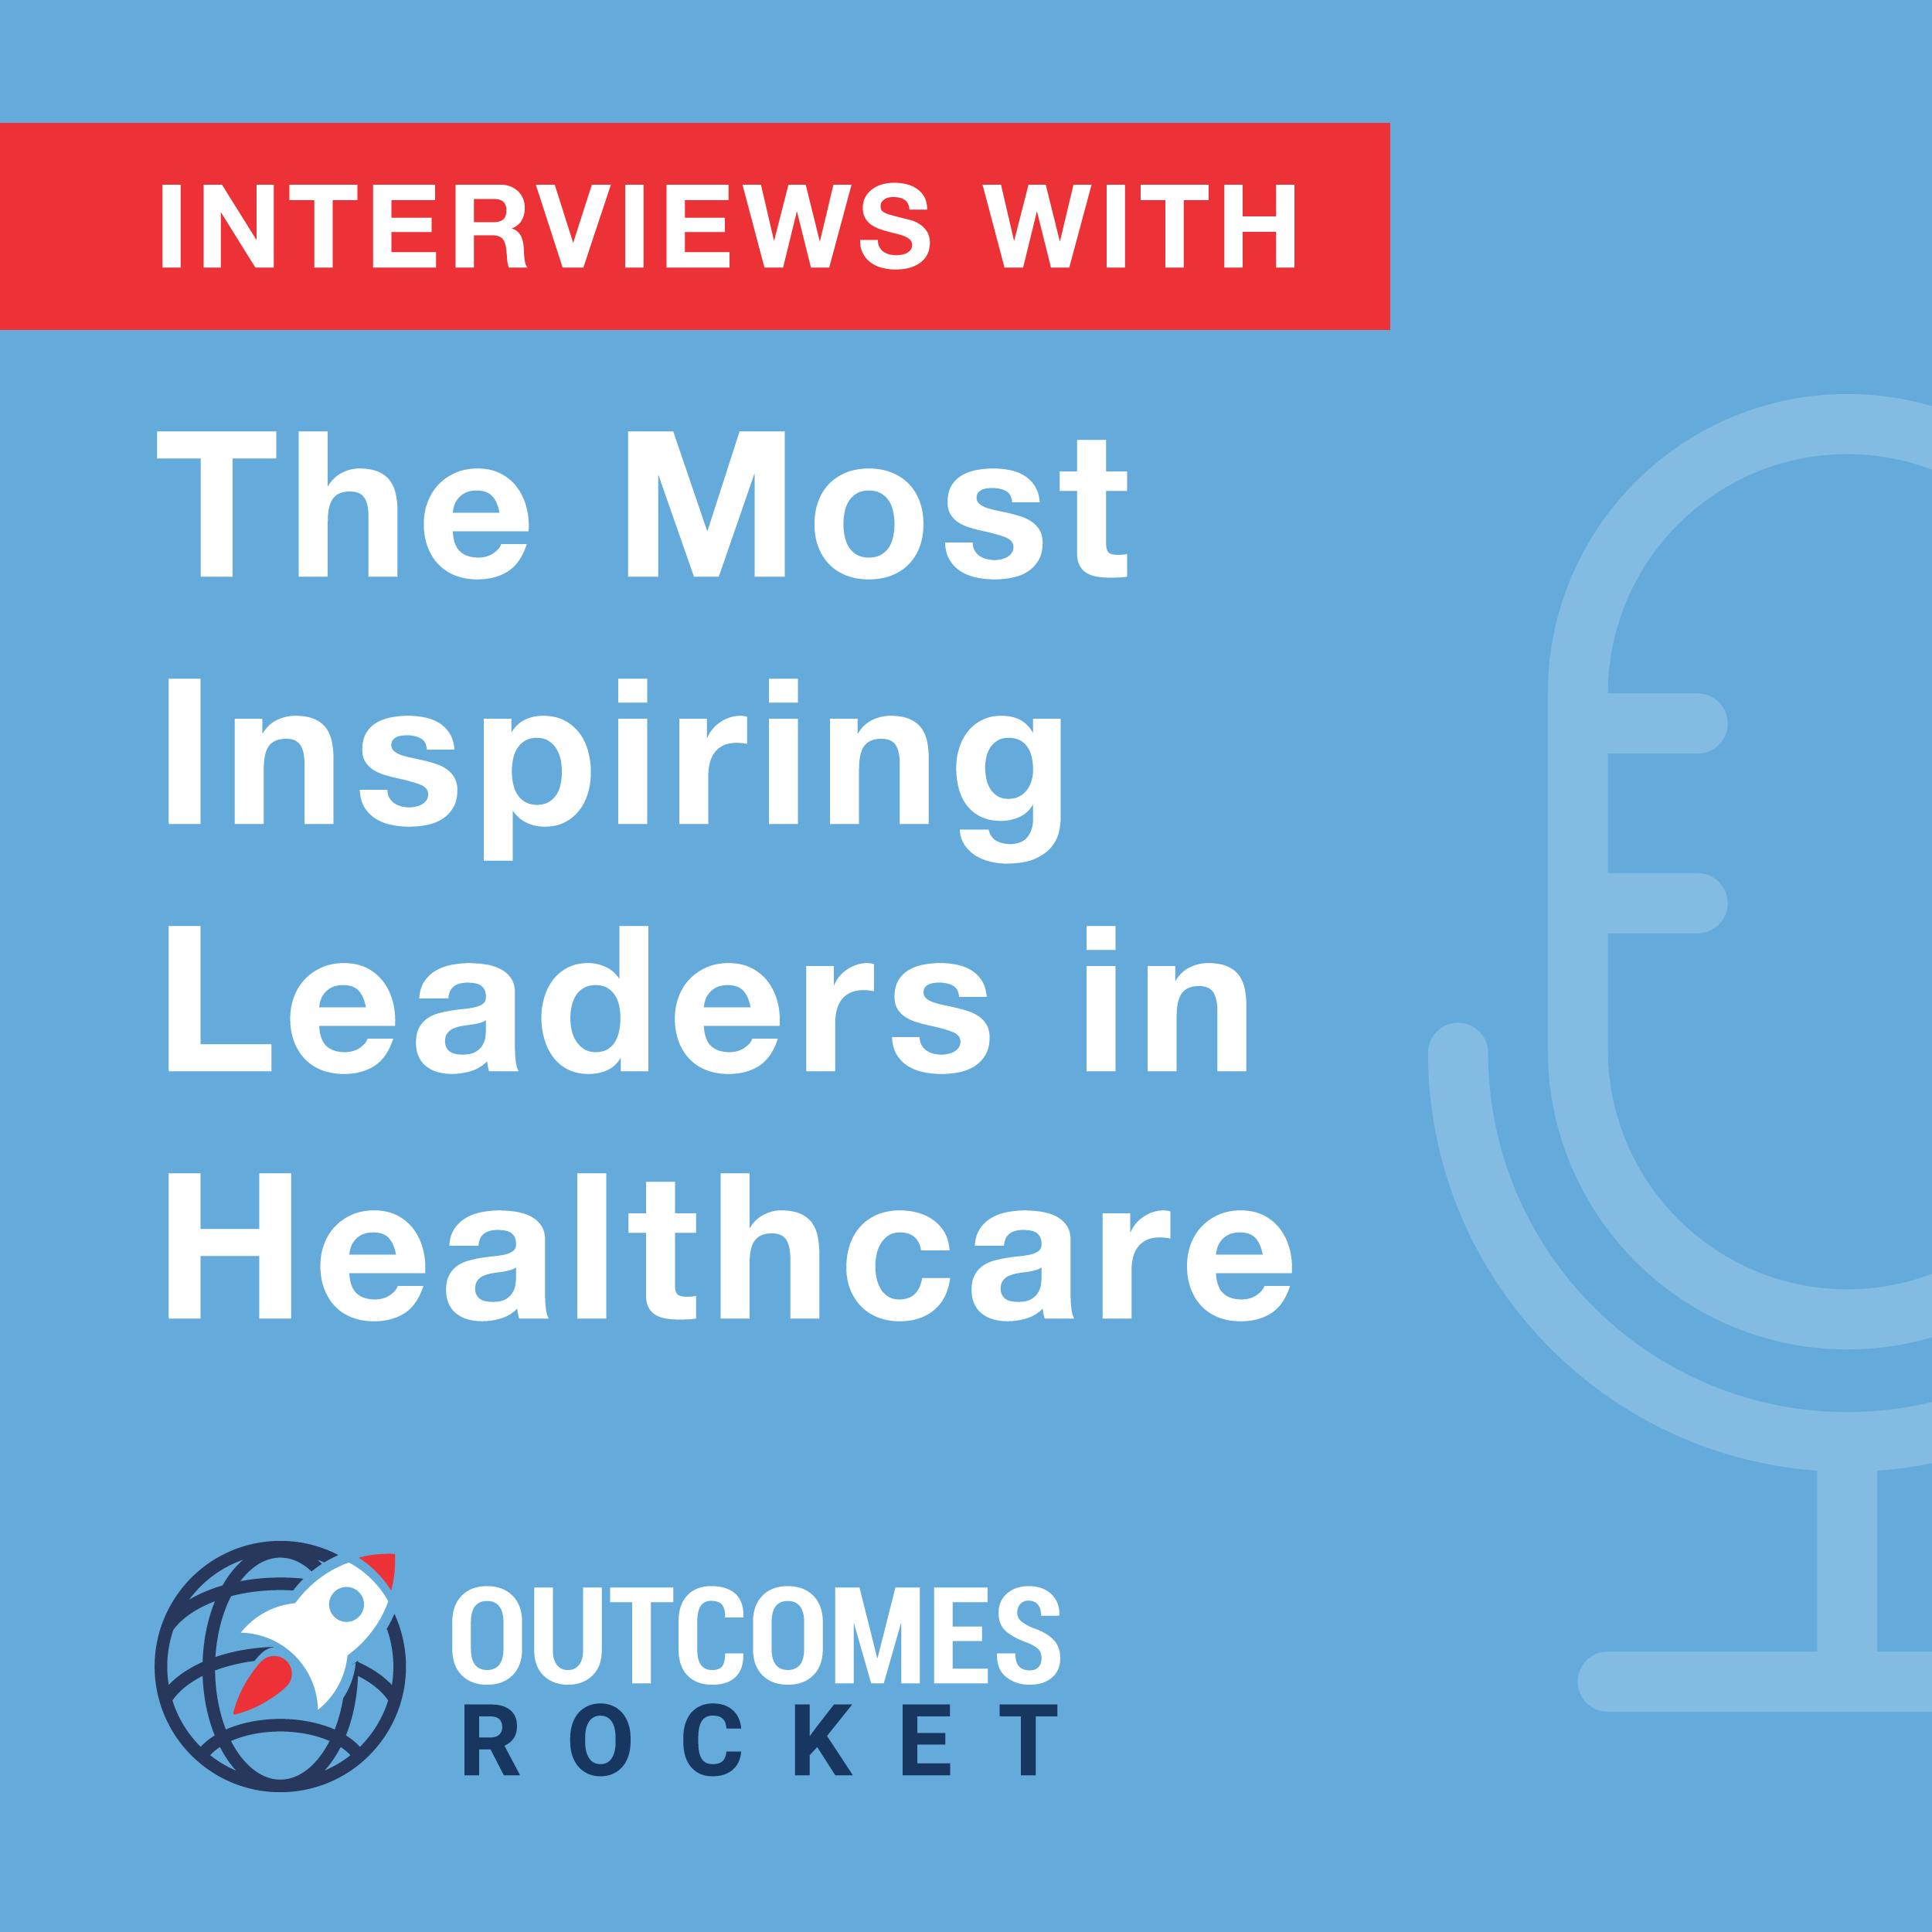 Six Ways to Market Your Practice with Stewart Gandolf, CEO of Healthcare Success